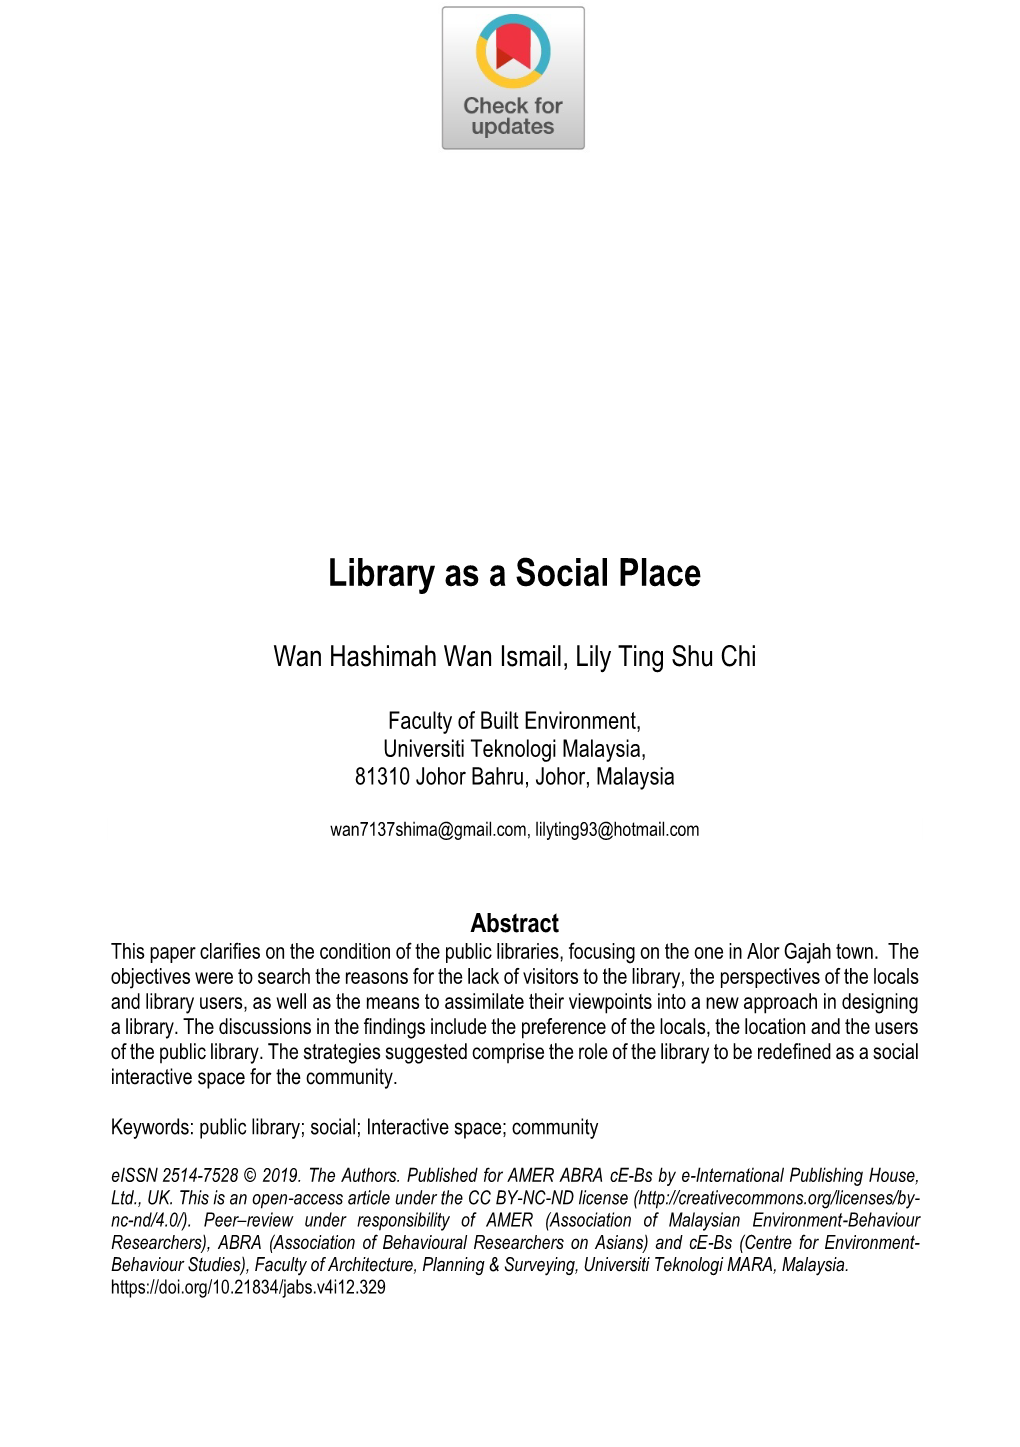 Library As a Social Place